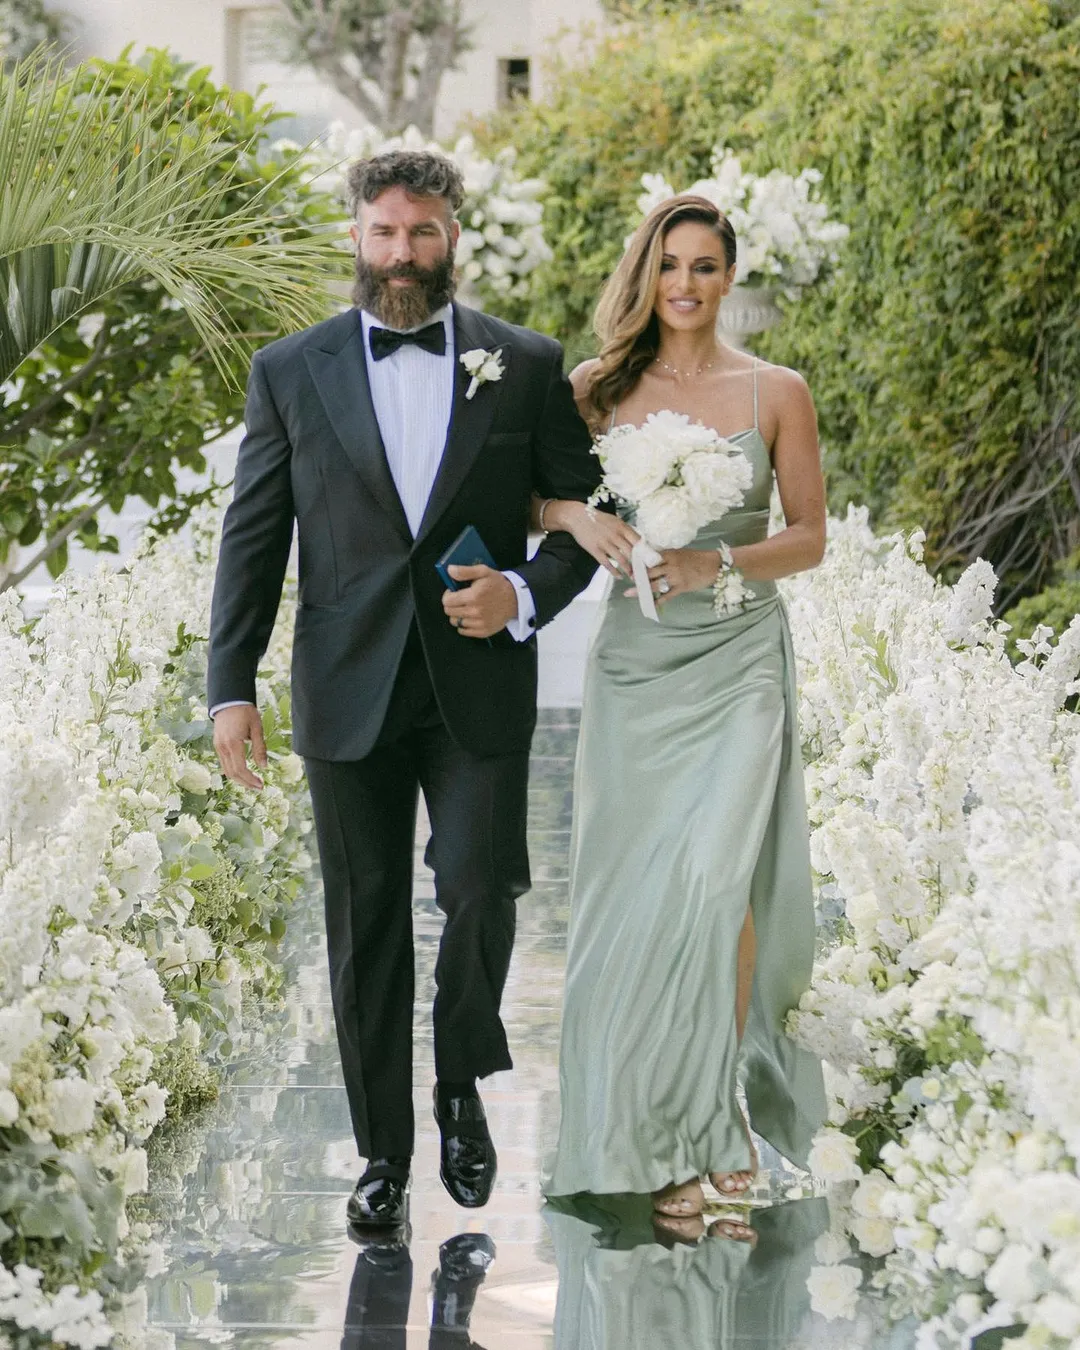 Dan Bilzerian is said to be married to his supposed mysterious wife